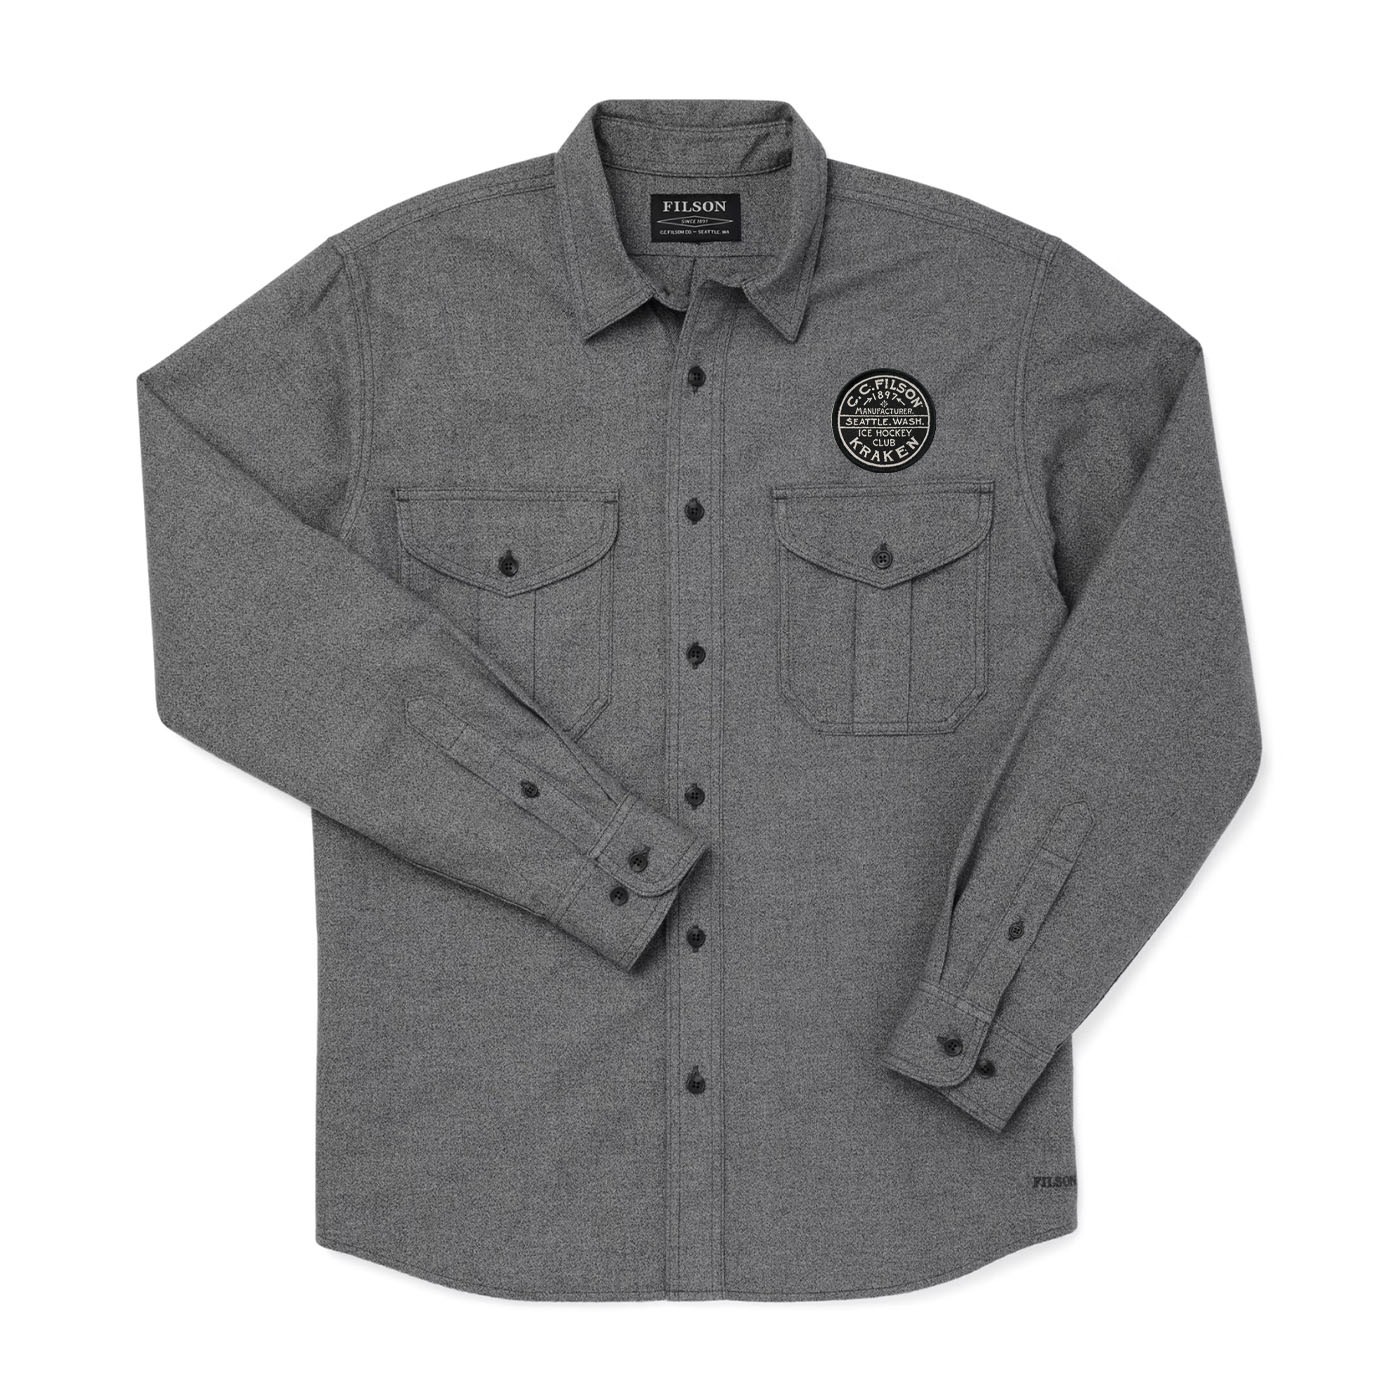 You can now score Seattle Kraken branded Filson gear at select team stores